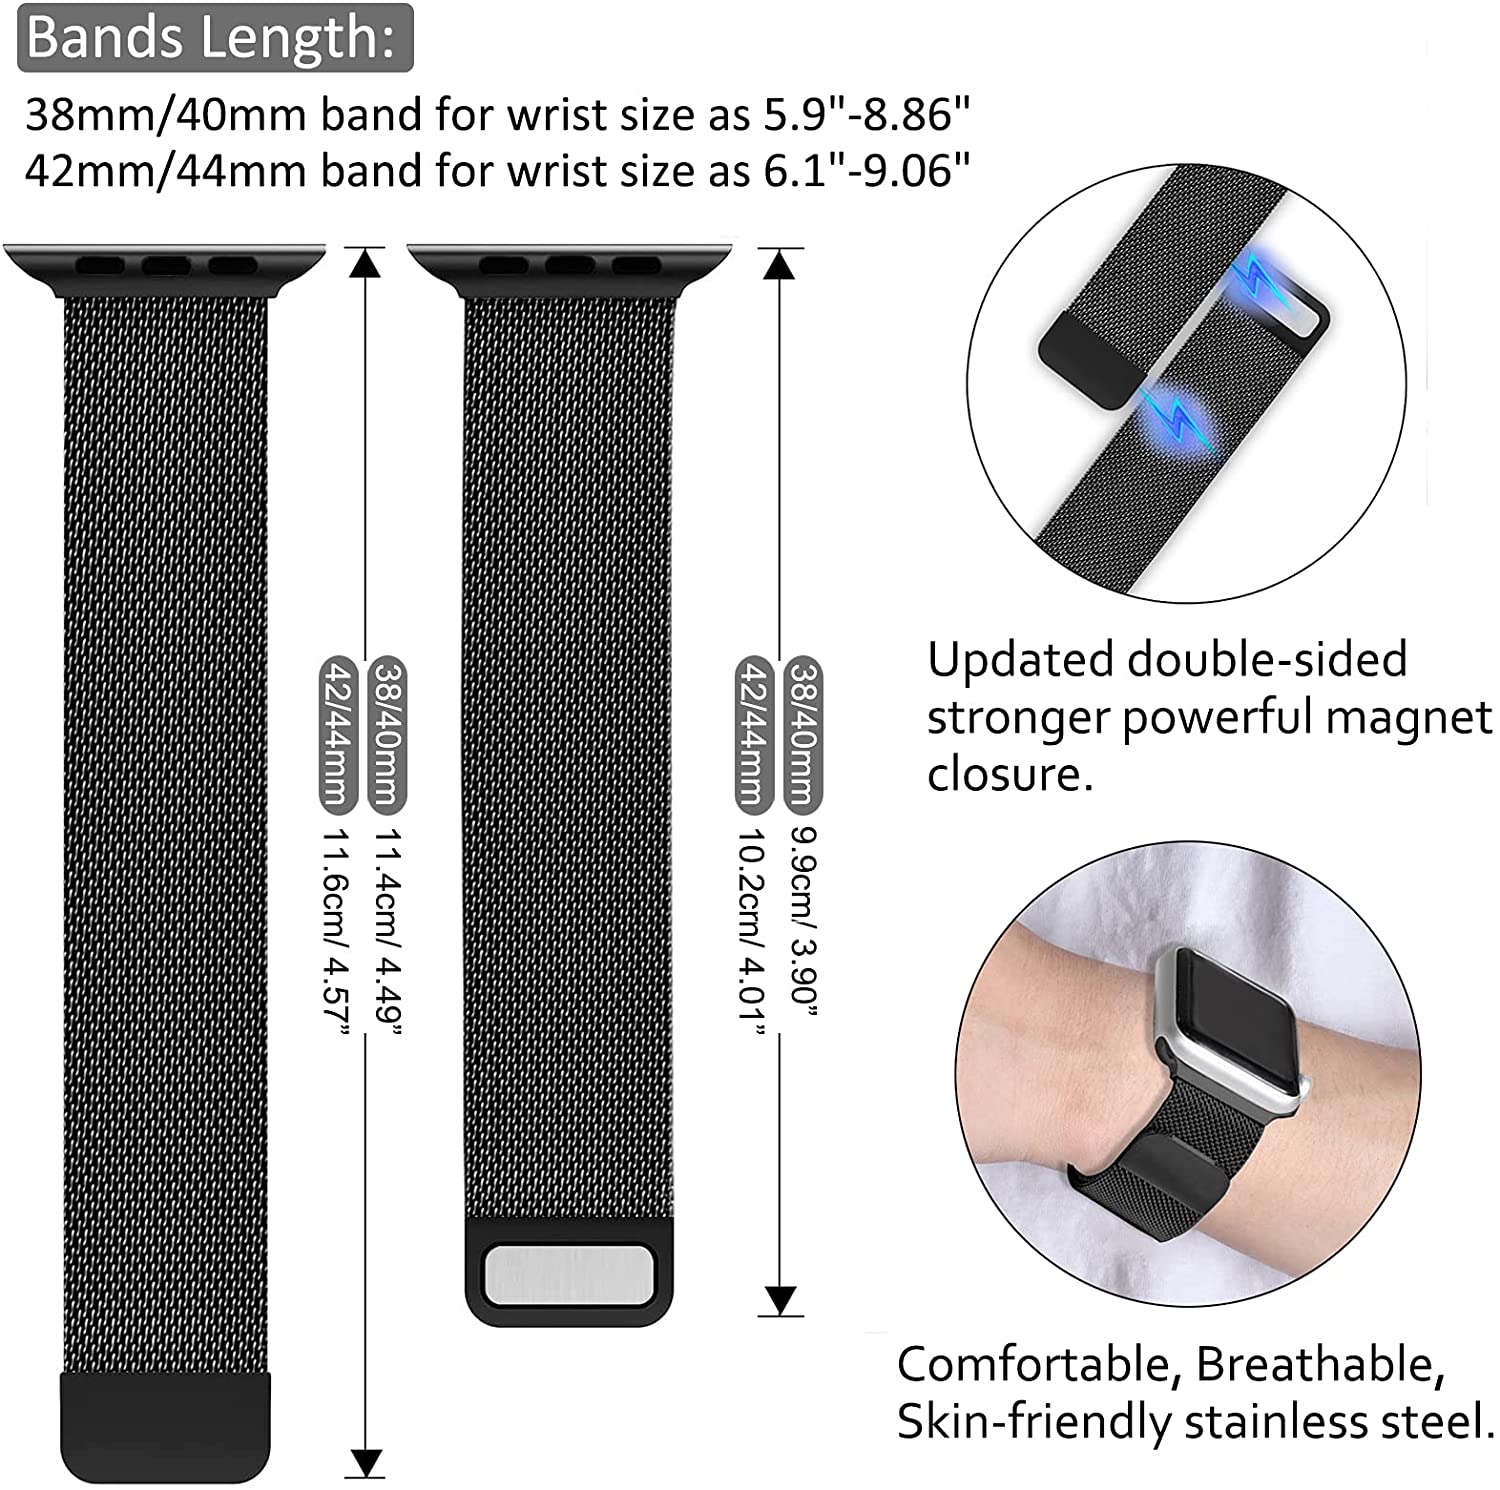 Watchbands , magnetic double section strap - M&H FashionWatchbands , magnetic double section strapiPhoneM&H FashionM&H Fashion200000049:3348727#Seven colors;200000051:100016944#For 38mm-40mm-41mmSeven colorsFor 38mm-40mm-41mmWatchbands , magnetic double section strapM&H FashioniPhoneM&H FashionThis eCommerce store offers a wide selection of watchbands, including the Magnetic Double Section Strap. This stylish and durable watchband is made of metal and featWatchbands , magnetic double section str